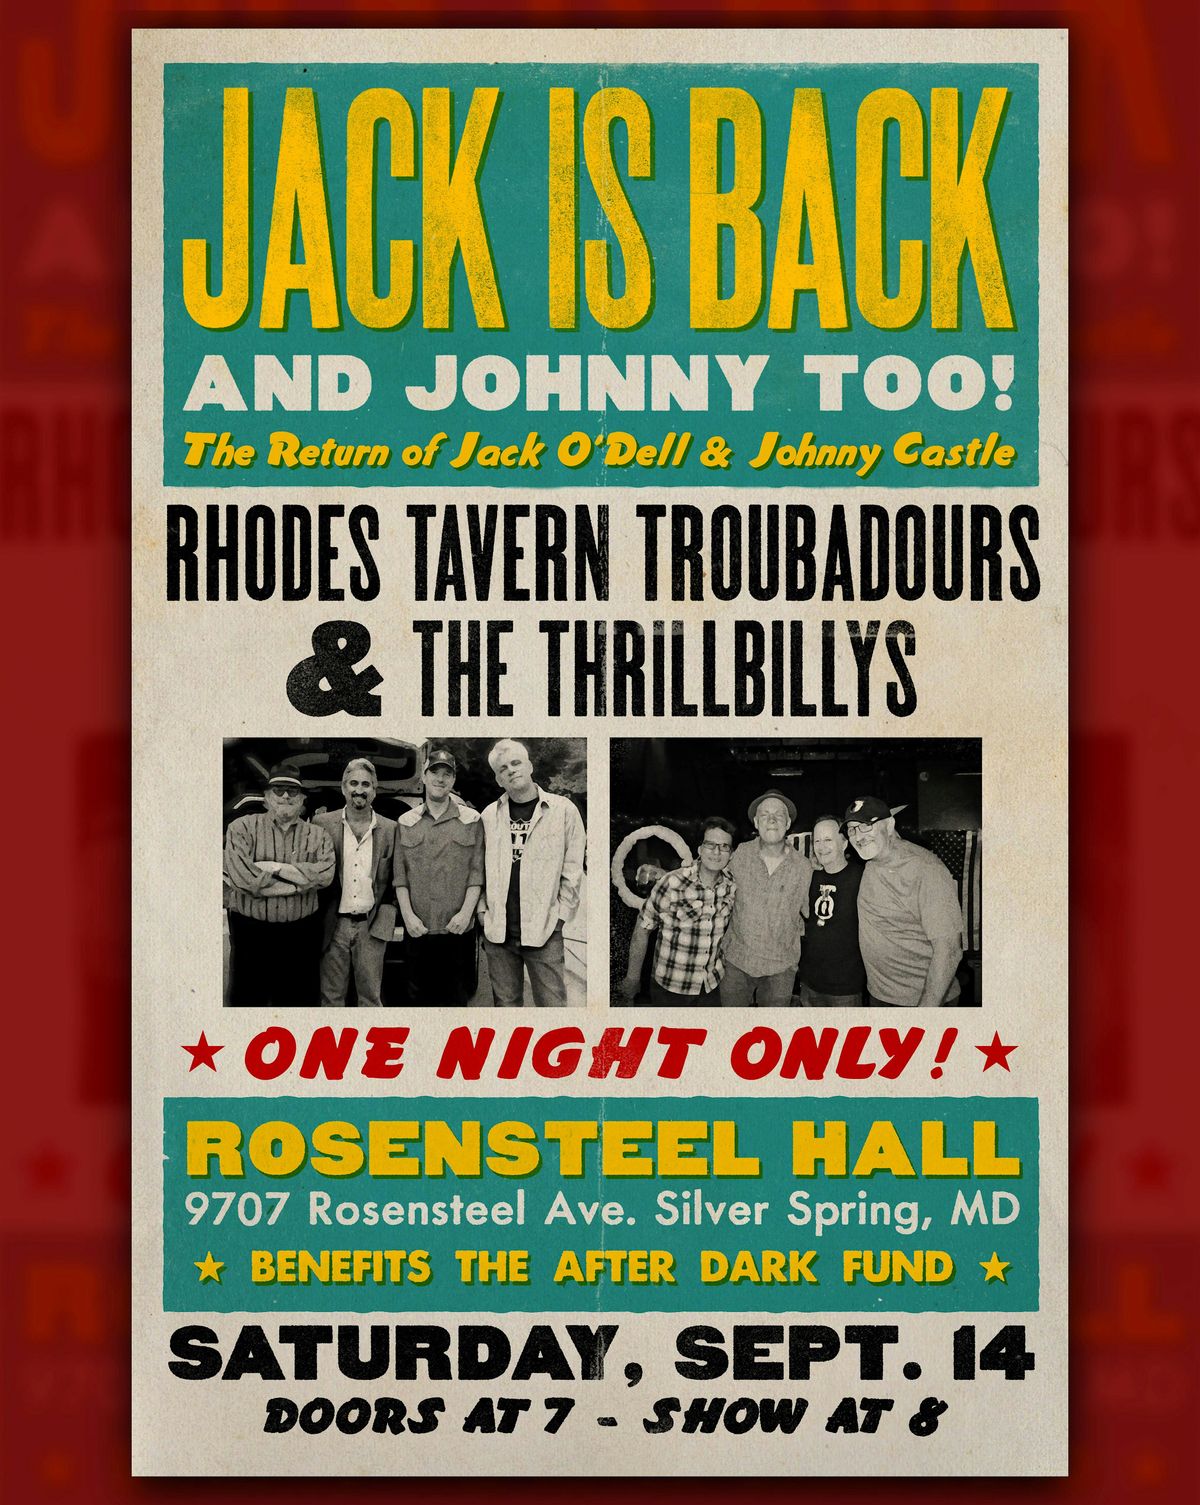 Jack Is Back ! Rhodes Tavern Troubadours & The Thrillbillys  One Night Only